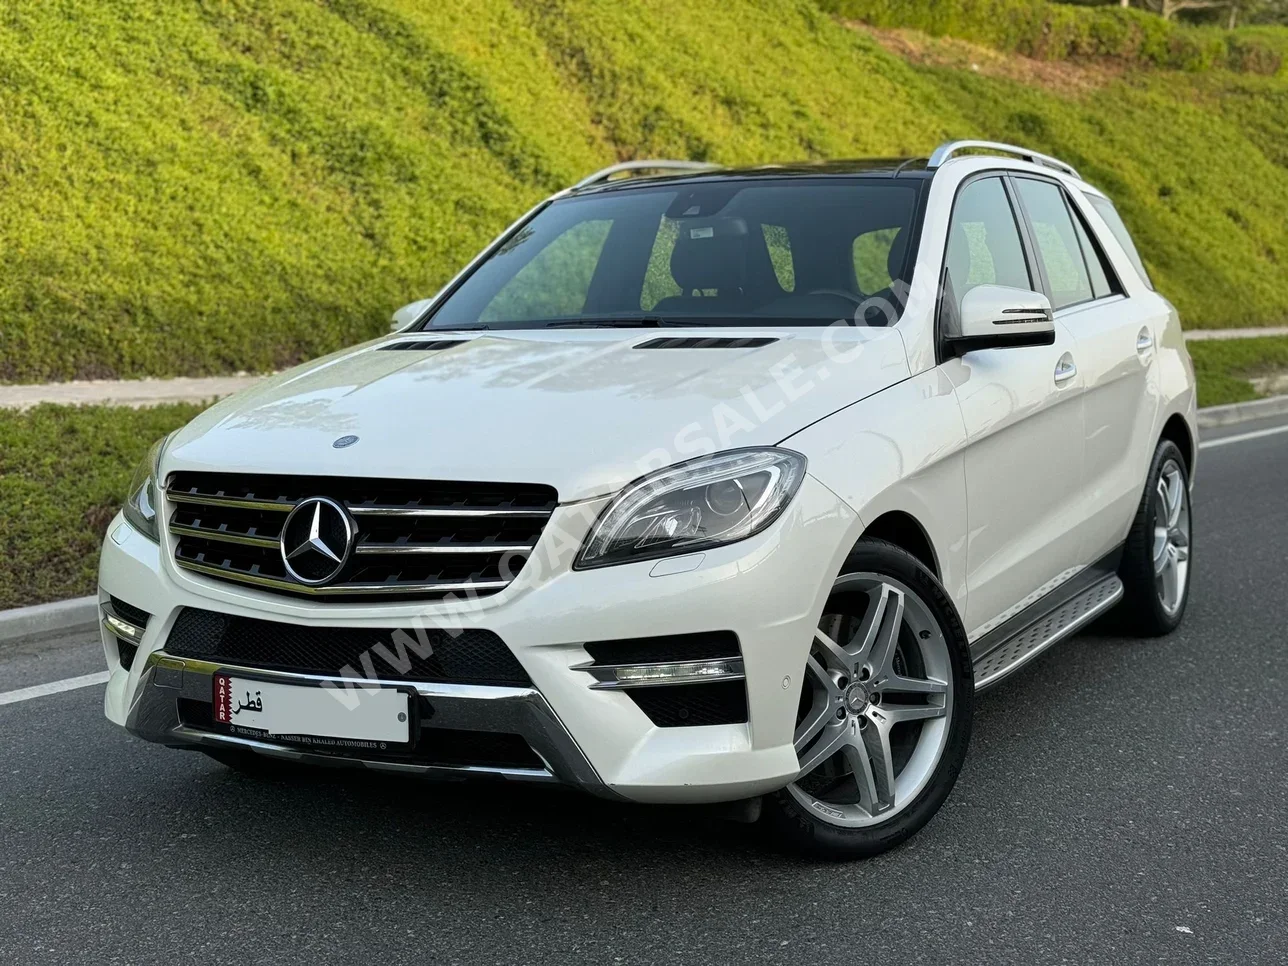 Mercedes-Benz  ML  350 AMG  2013  Automatic  78,000 Km  6 Cylinder  Four Wheel Drive (4WD)  SUV  White